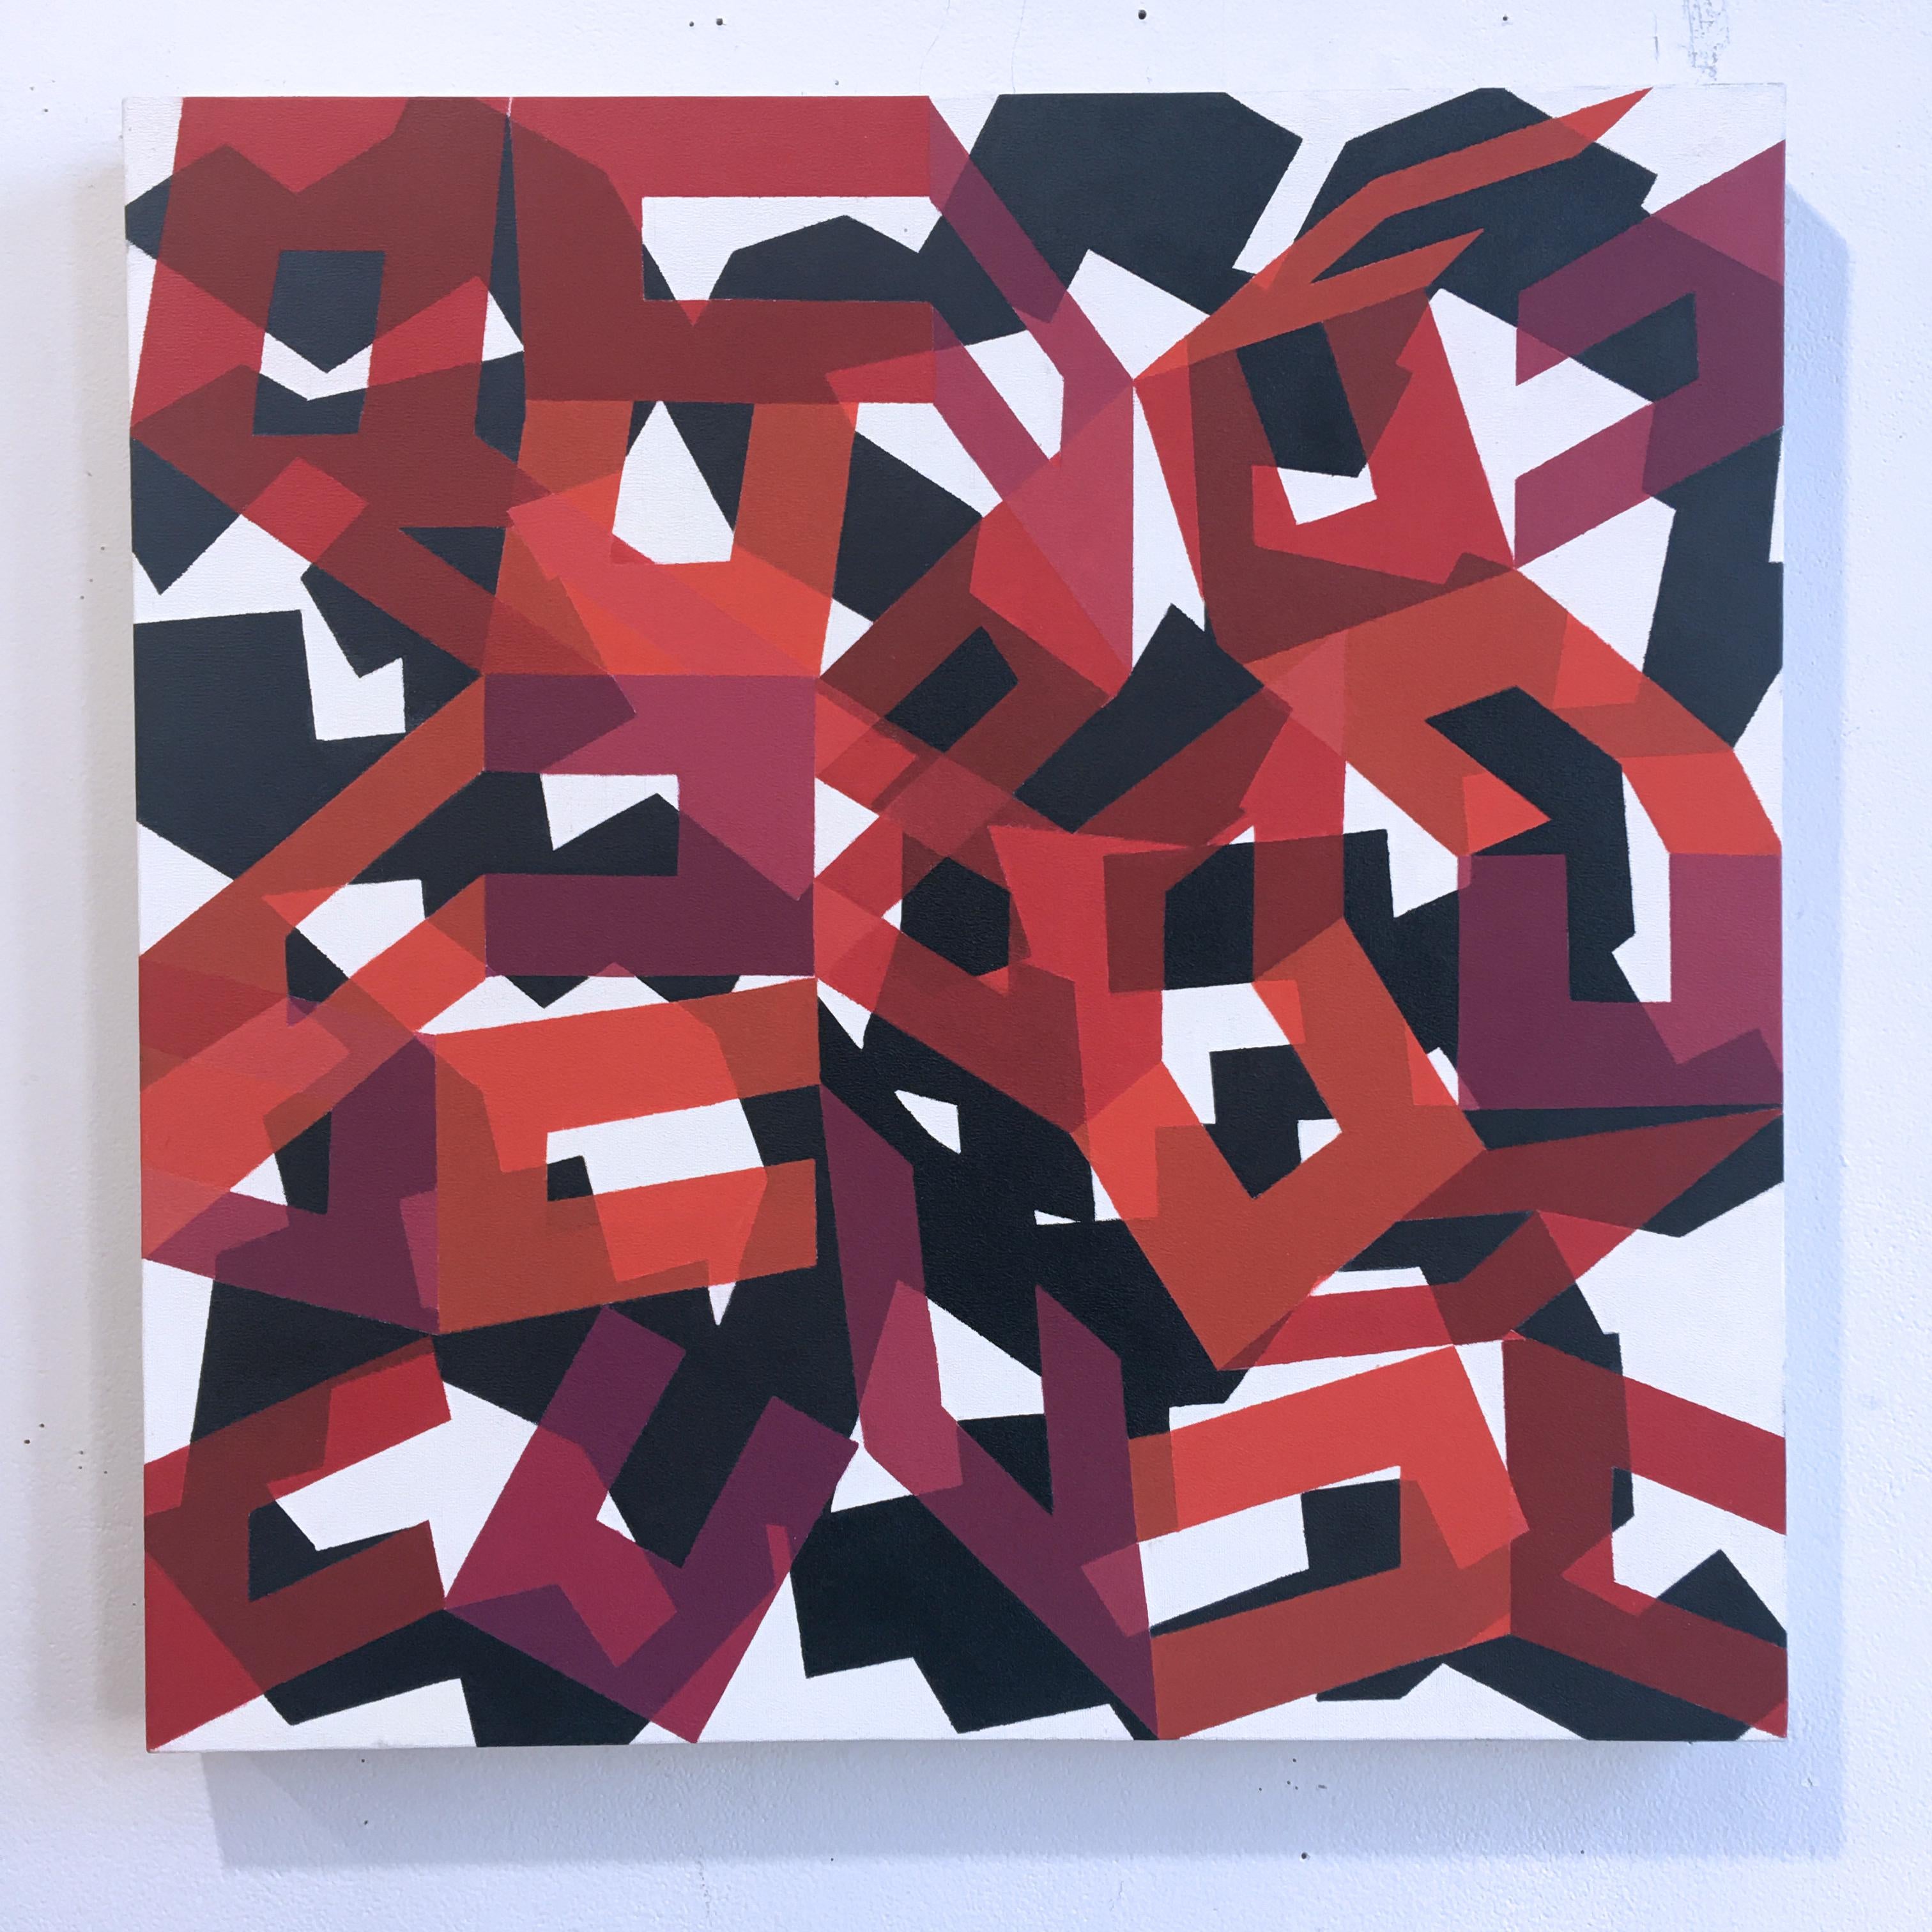 So Real, abstract geometric red & white large scale painting, oil on canvas 2013 - Painting by Kati Vilim